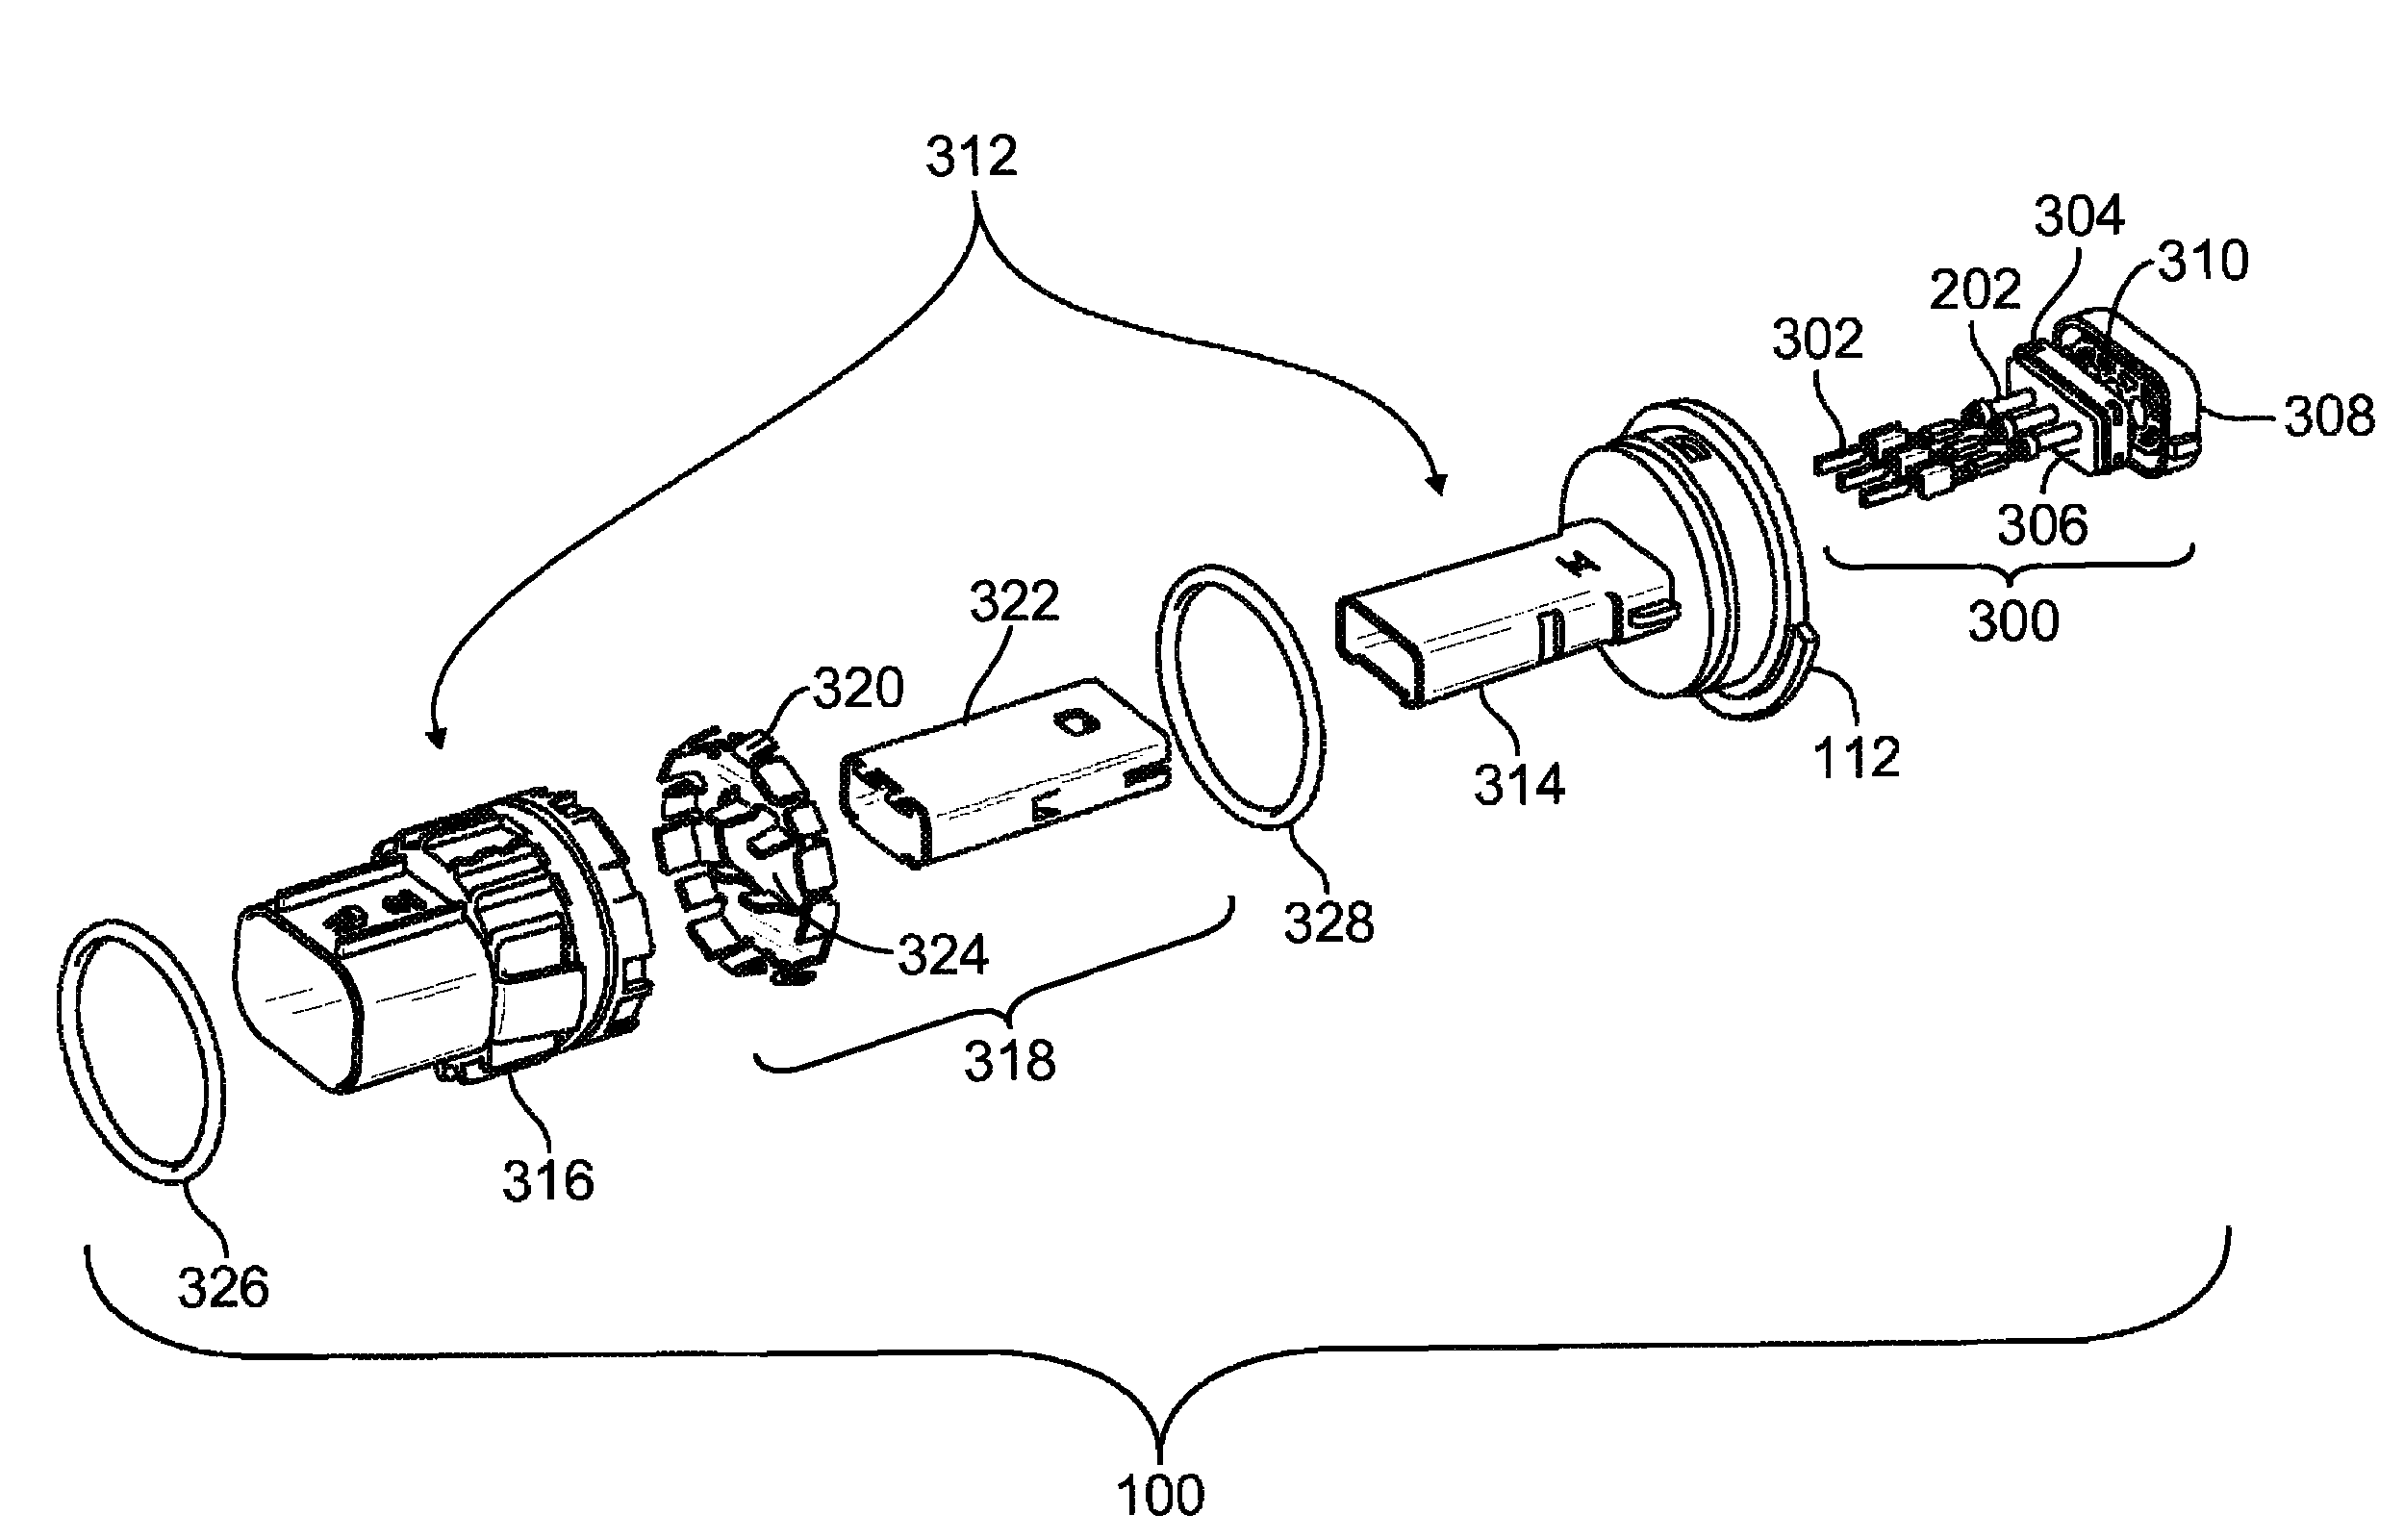 Header connector assembly